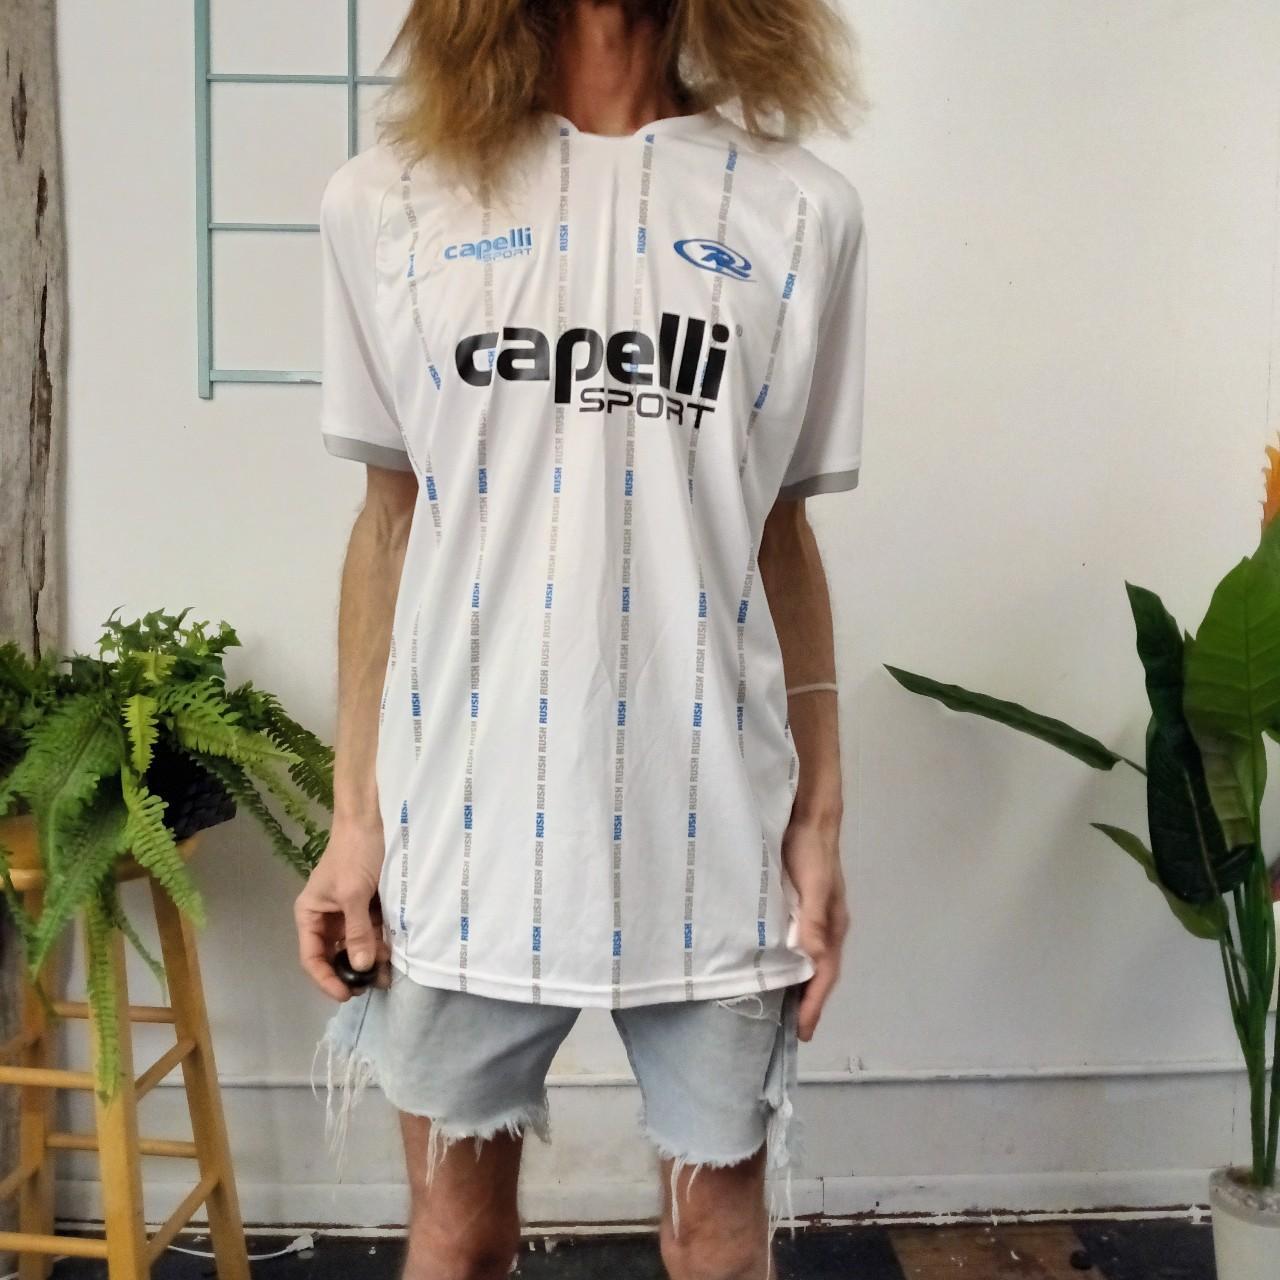 - soccer sporty to eminently its... Capelli jersey, Depop Sport